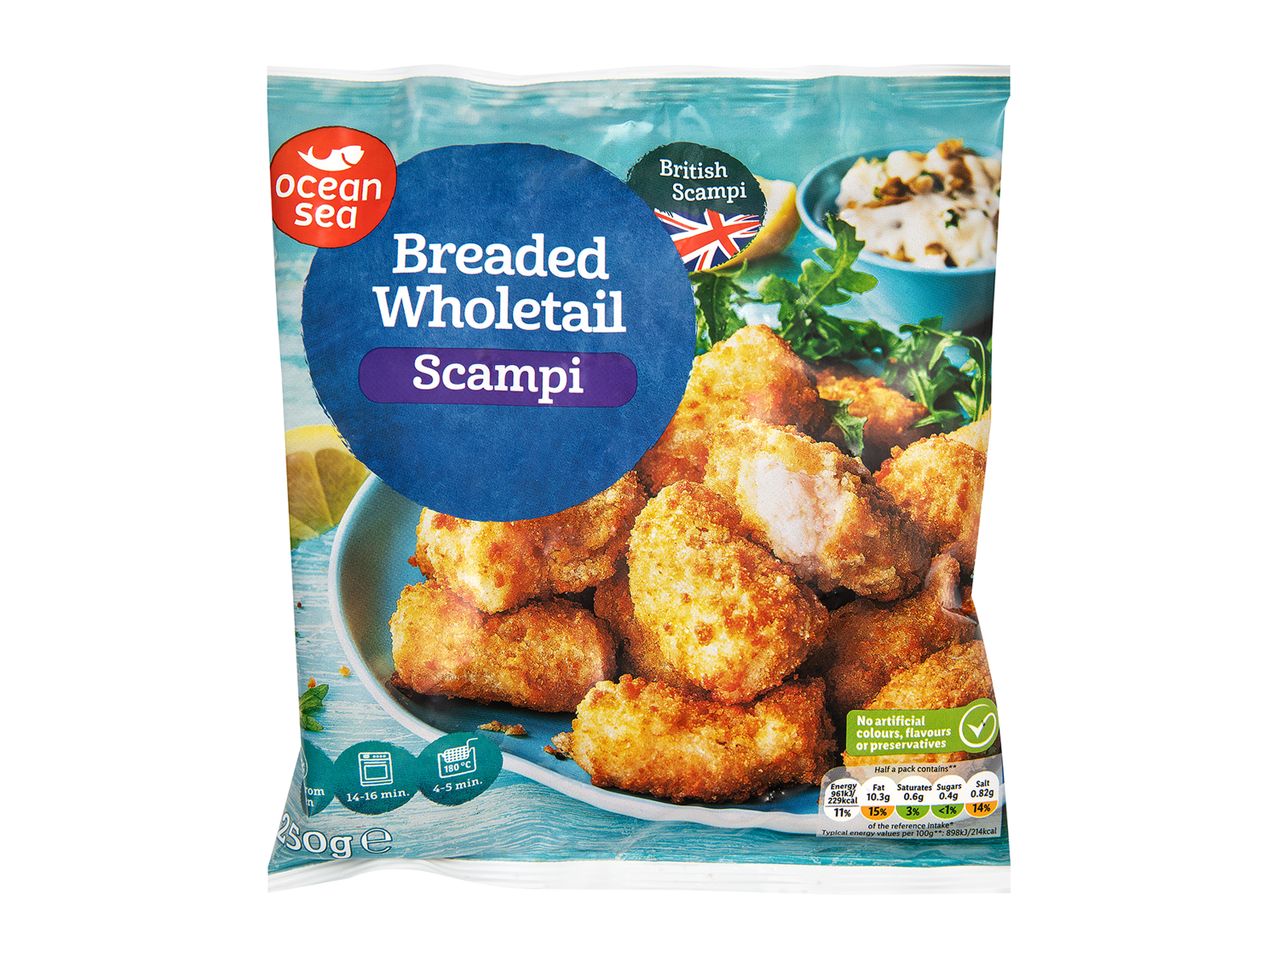 Go to full screen view: Ocean Sea Breaded Wholetail Scampi - Image 1